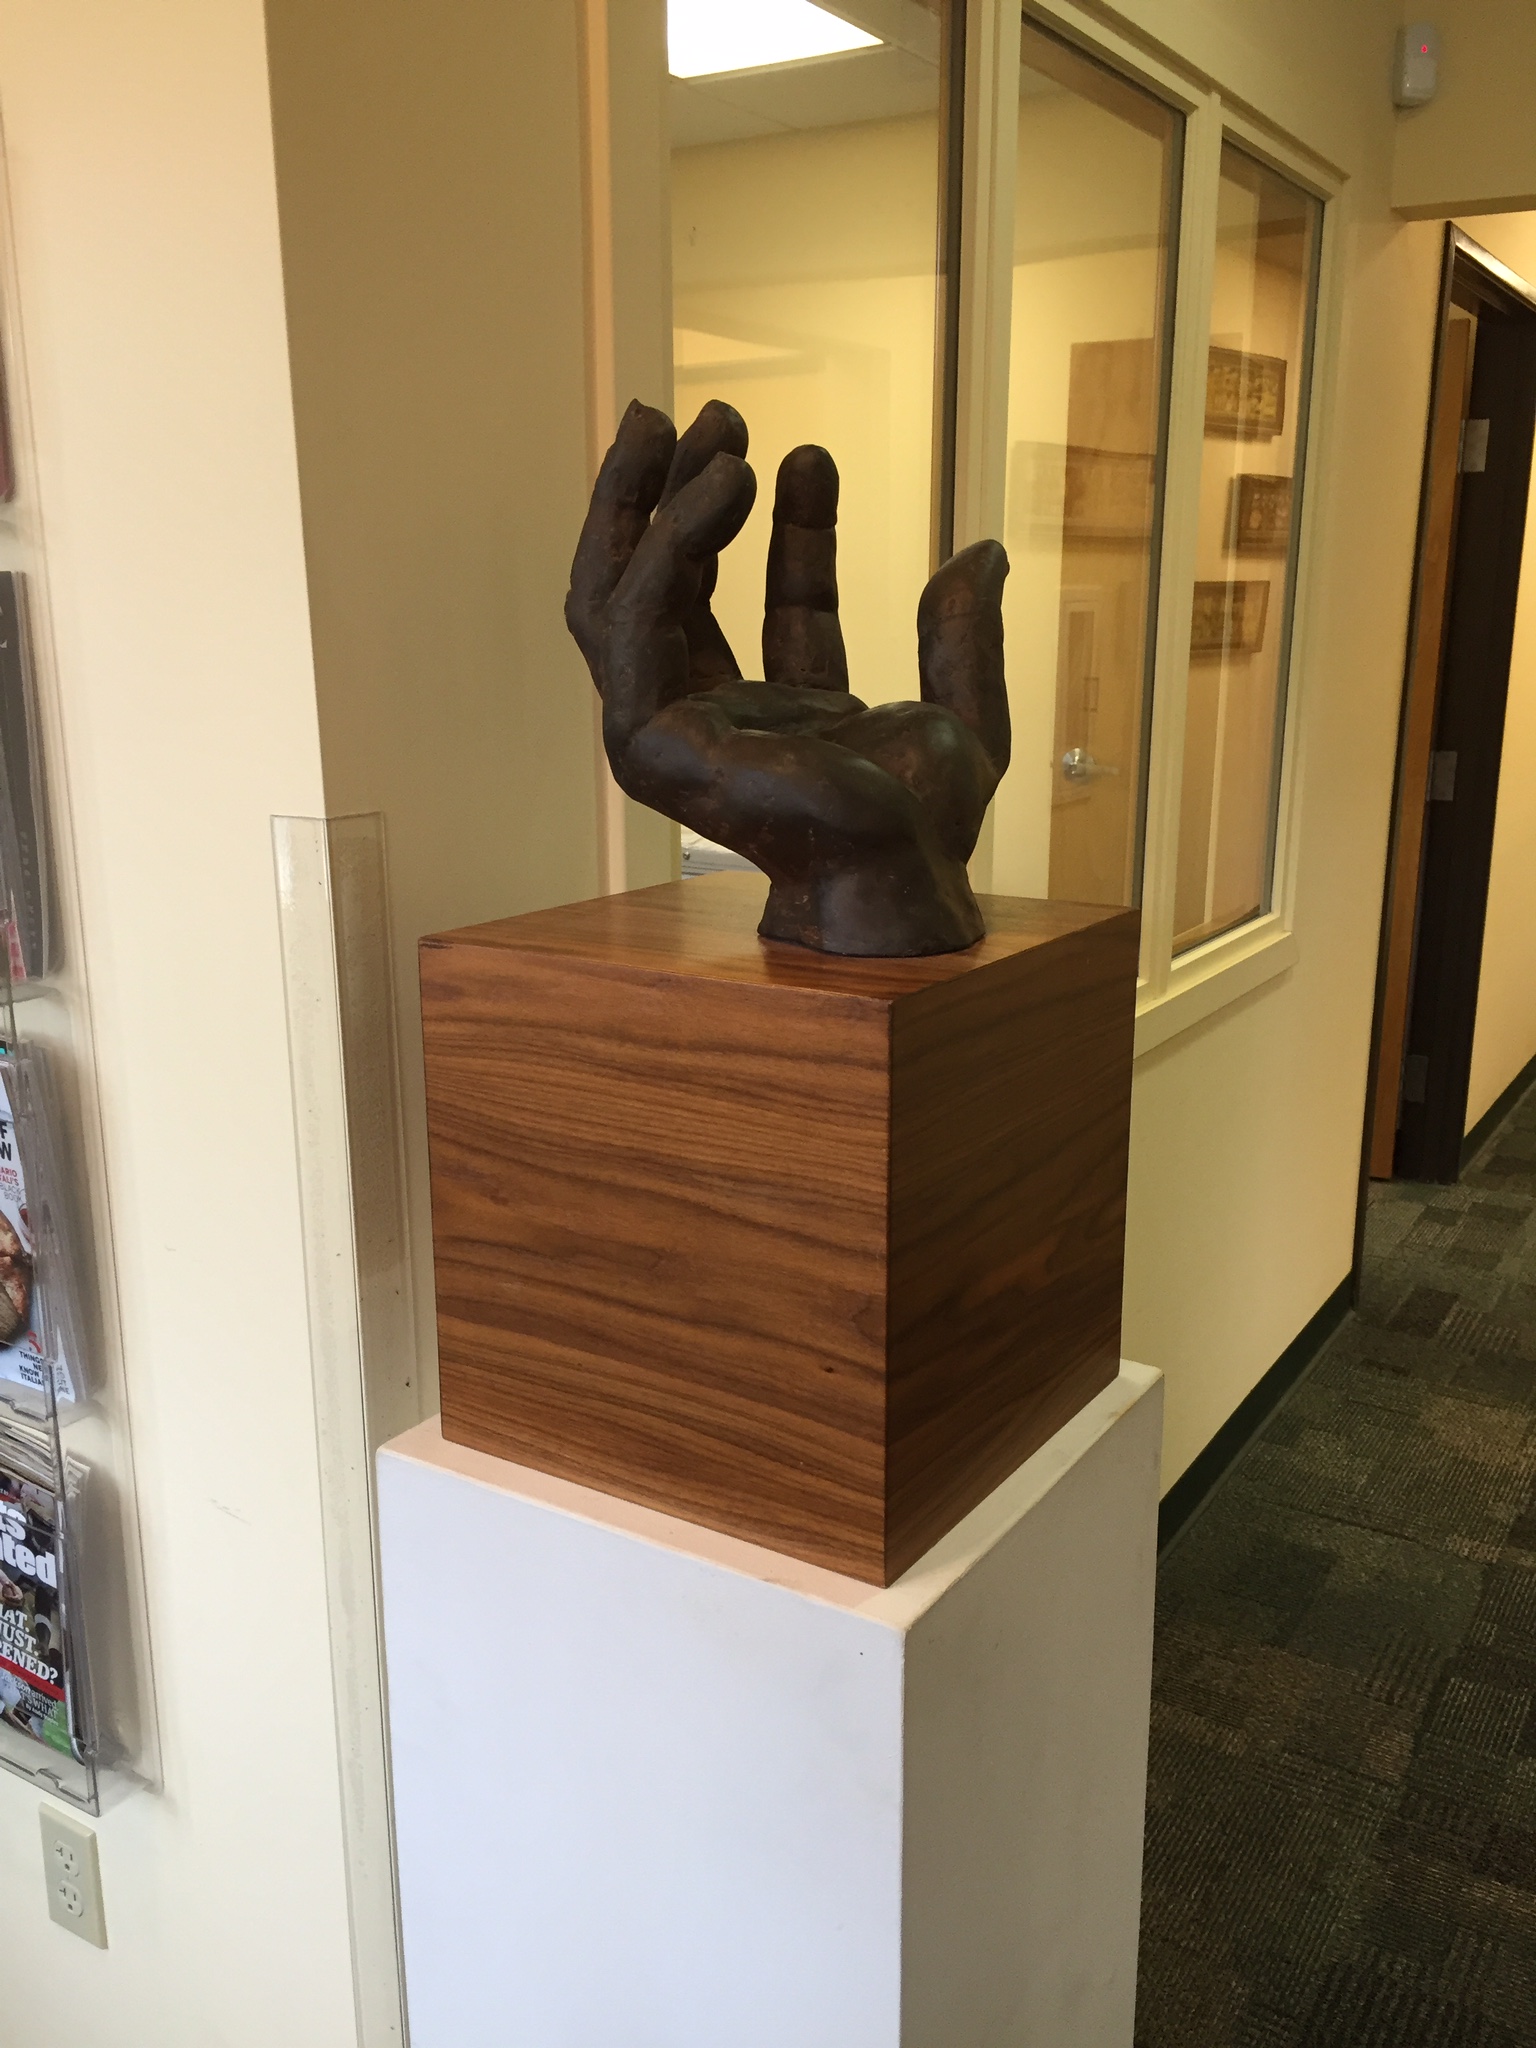 Sculpture of a right hand from the wrist up